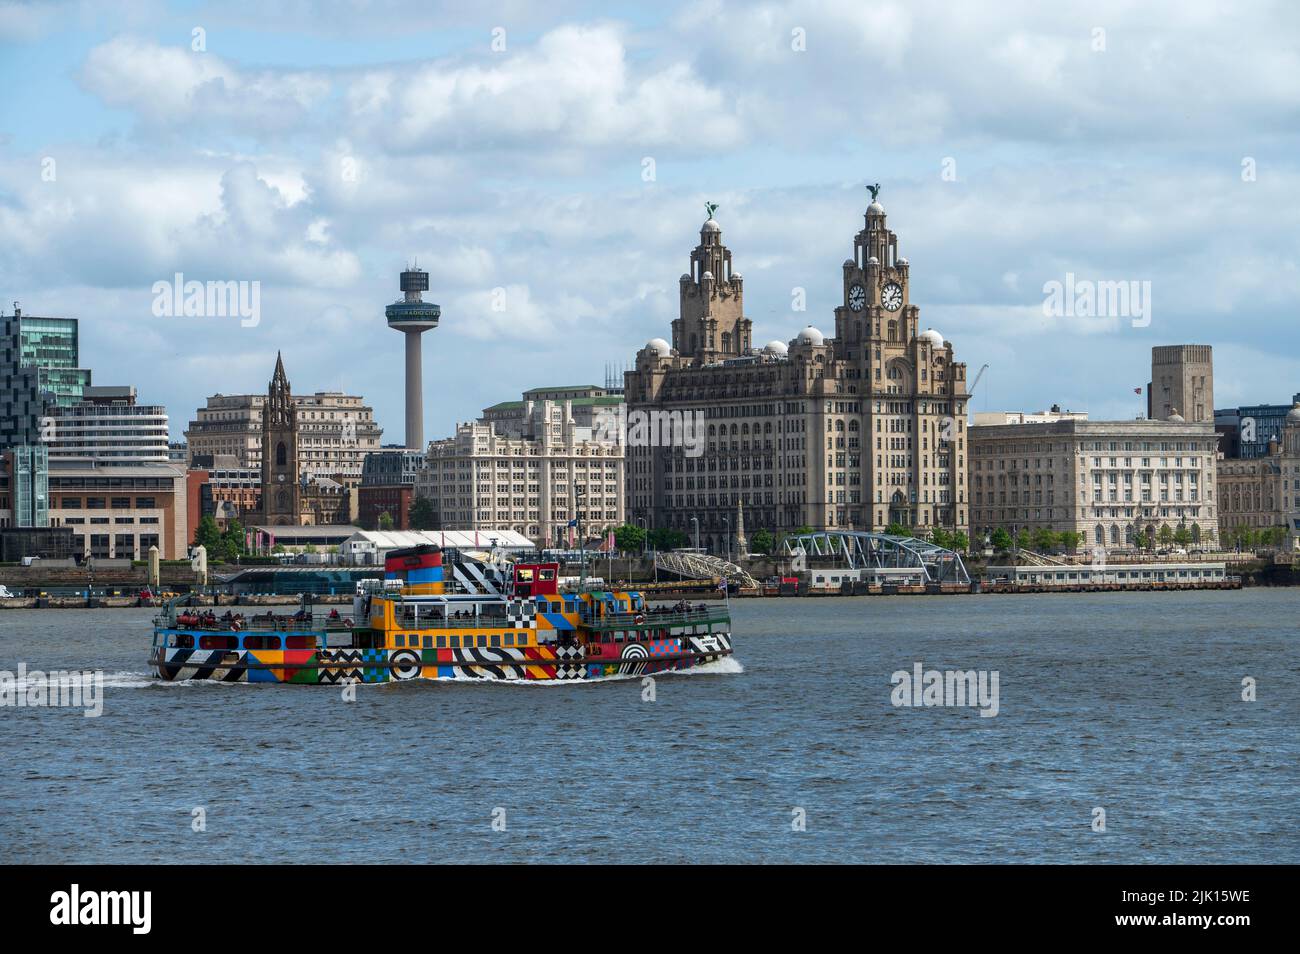 The Mersey ferry Snowdrop sailing in front of the Liverpool Waterfront, Liverpool, Merseyside, England, United Kingdom, Europe Stock Photo